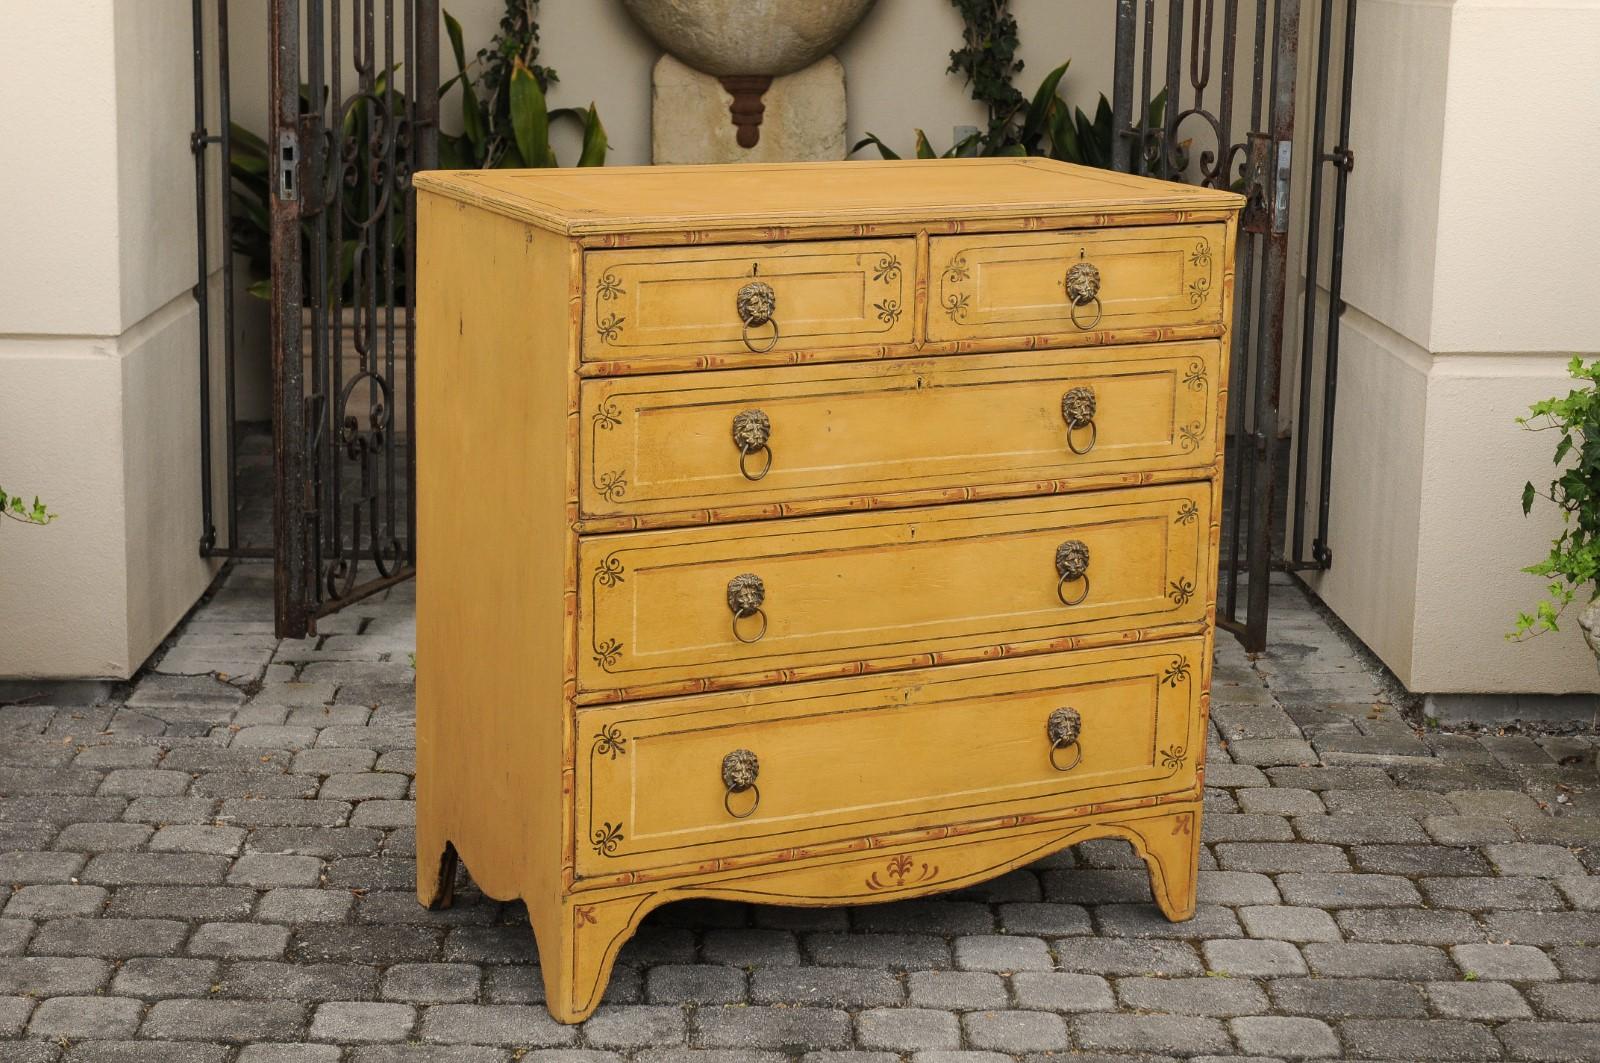 An English Regency goldenrod painted wood five-drawer chest from the 19th century, with floral accents and splayed bracket feet. Born in England during the first half of the 19th century, this English Regency painted commode features a rectangular